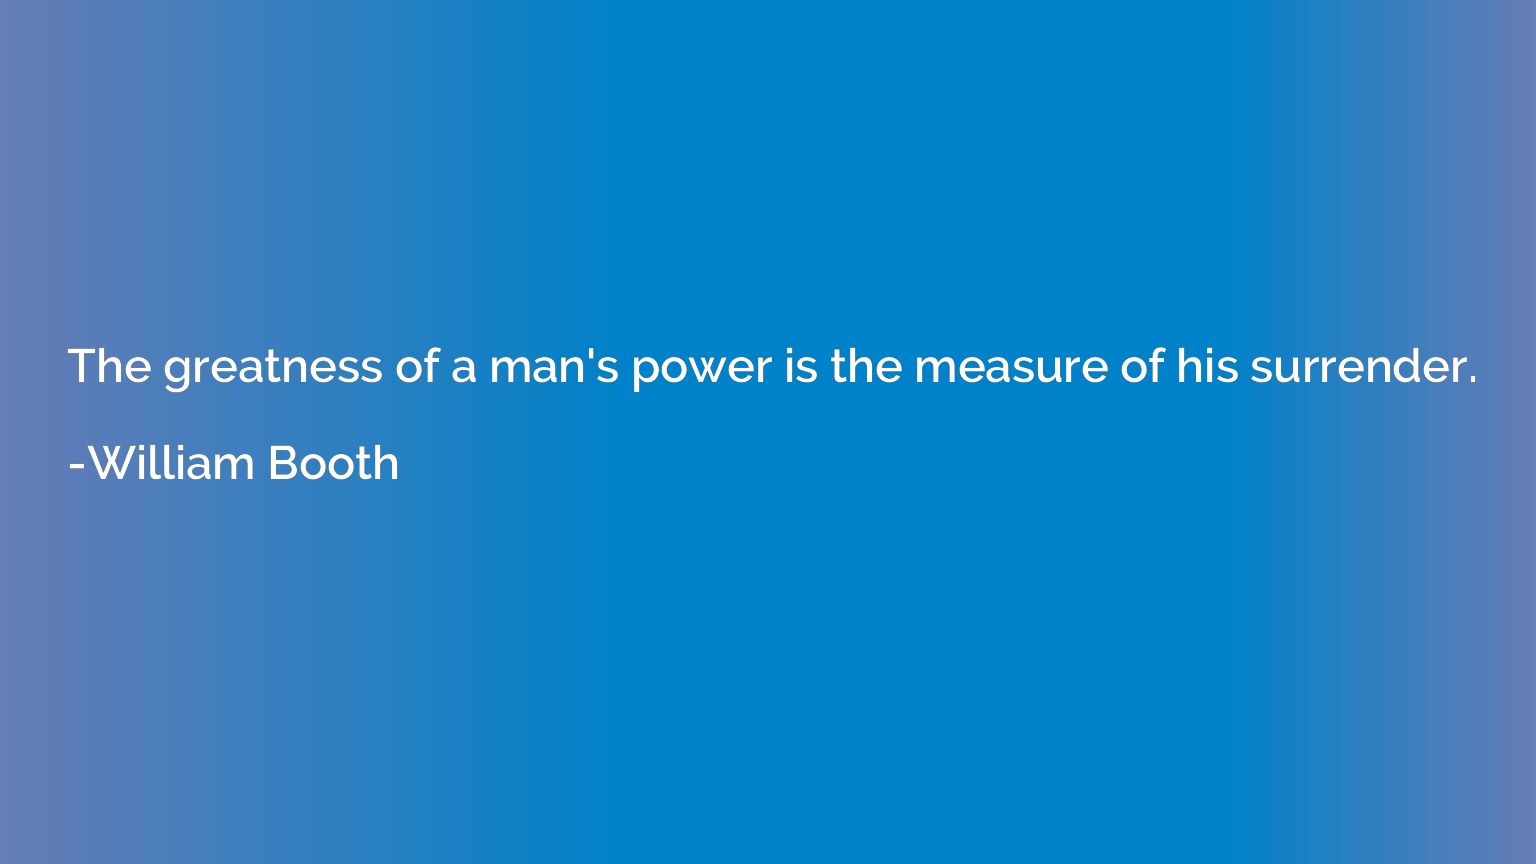 The greatness of a man's power is the measure of his surrend